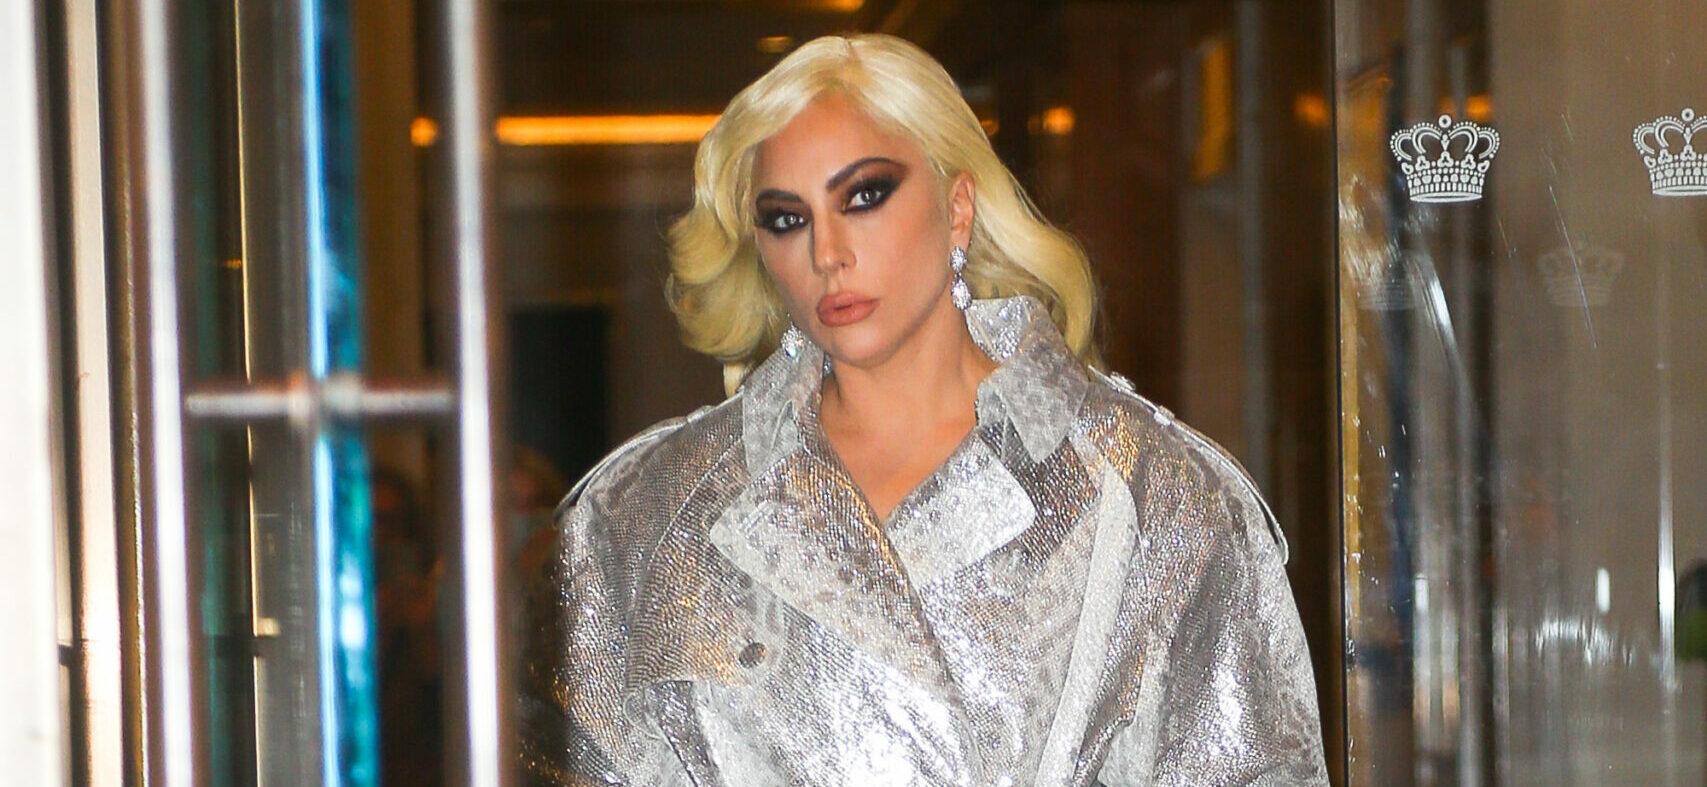 Lady Gaga seen heading to film the Colbert show in NYC